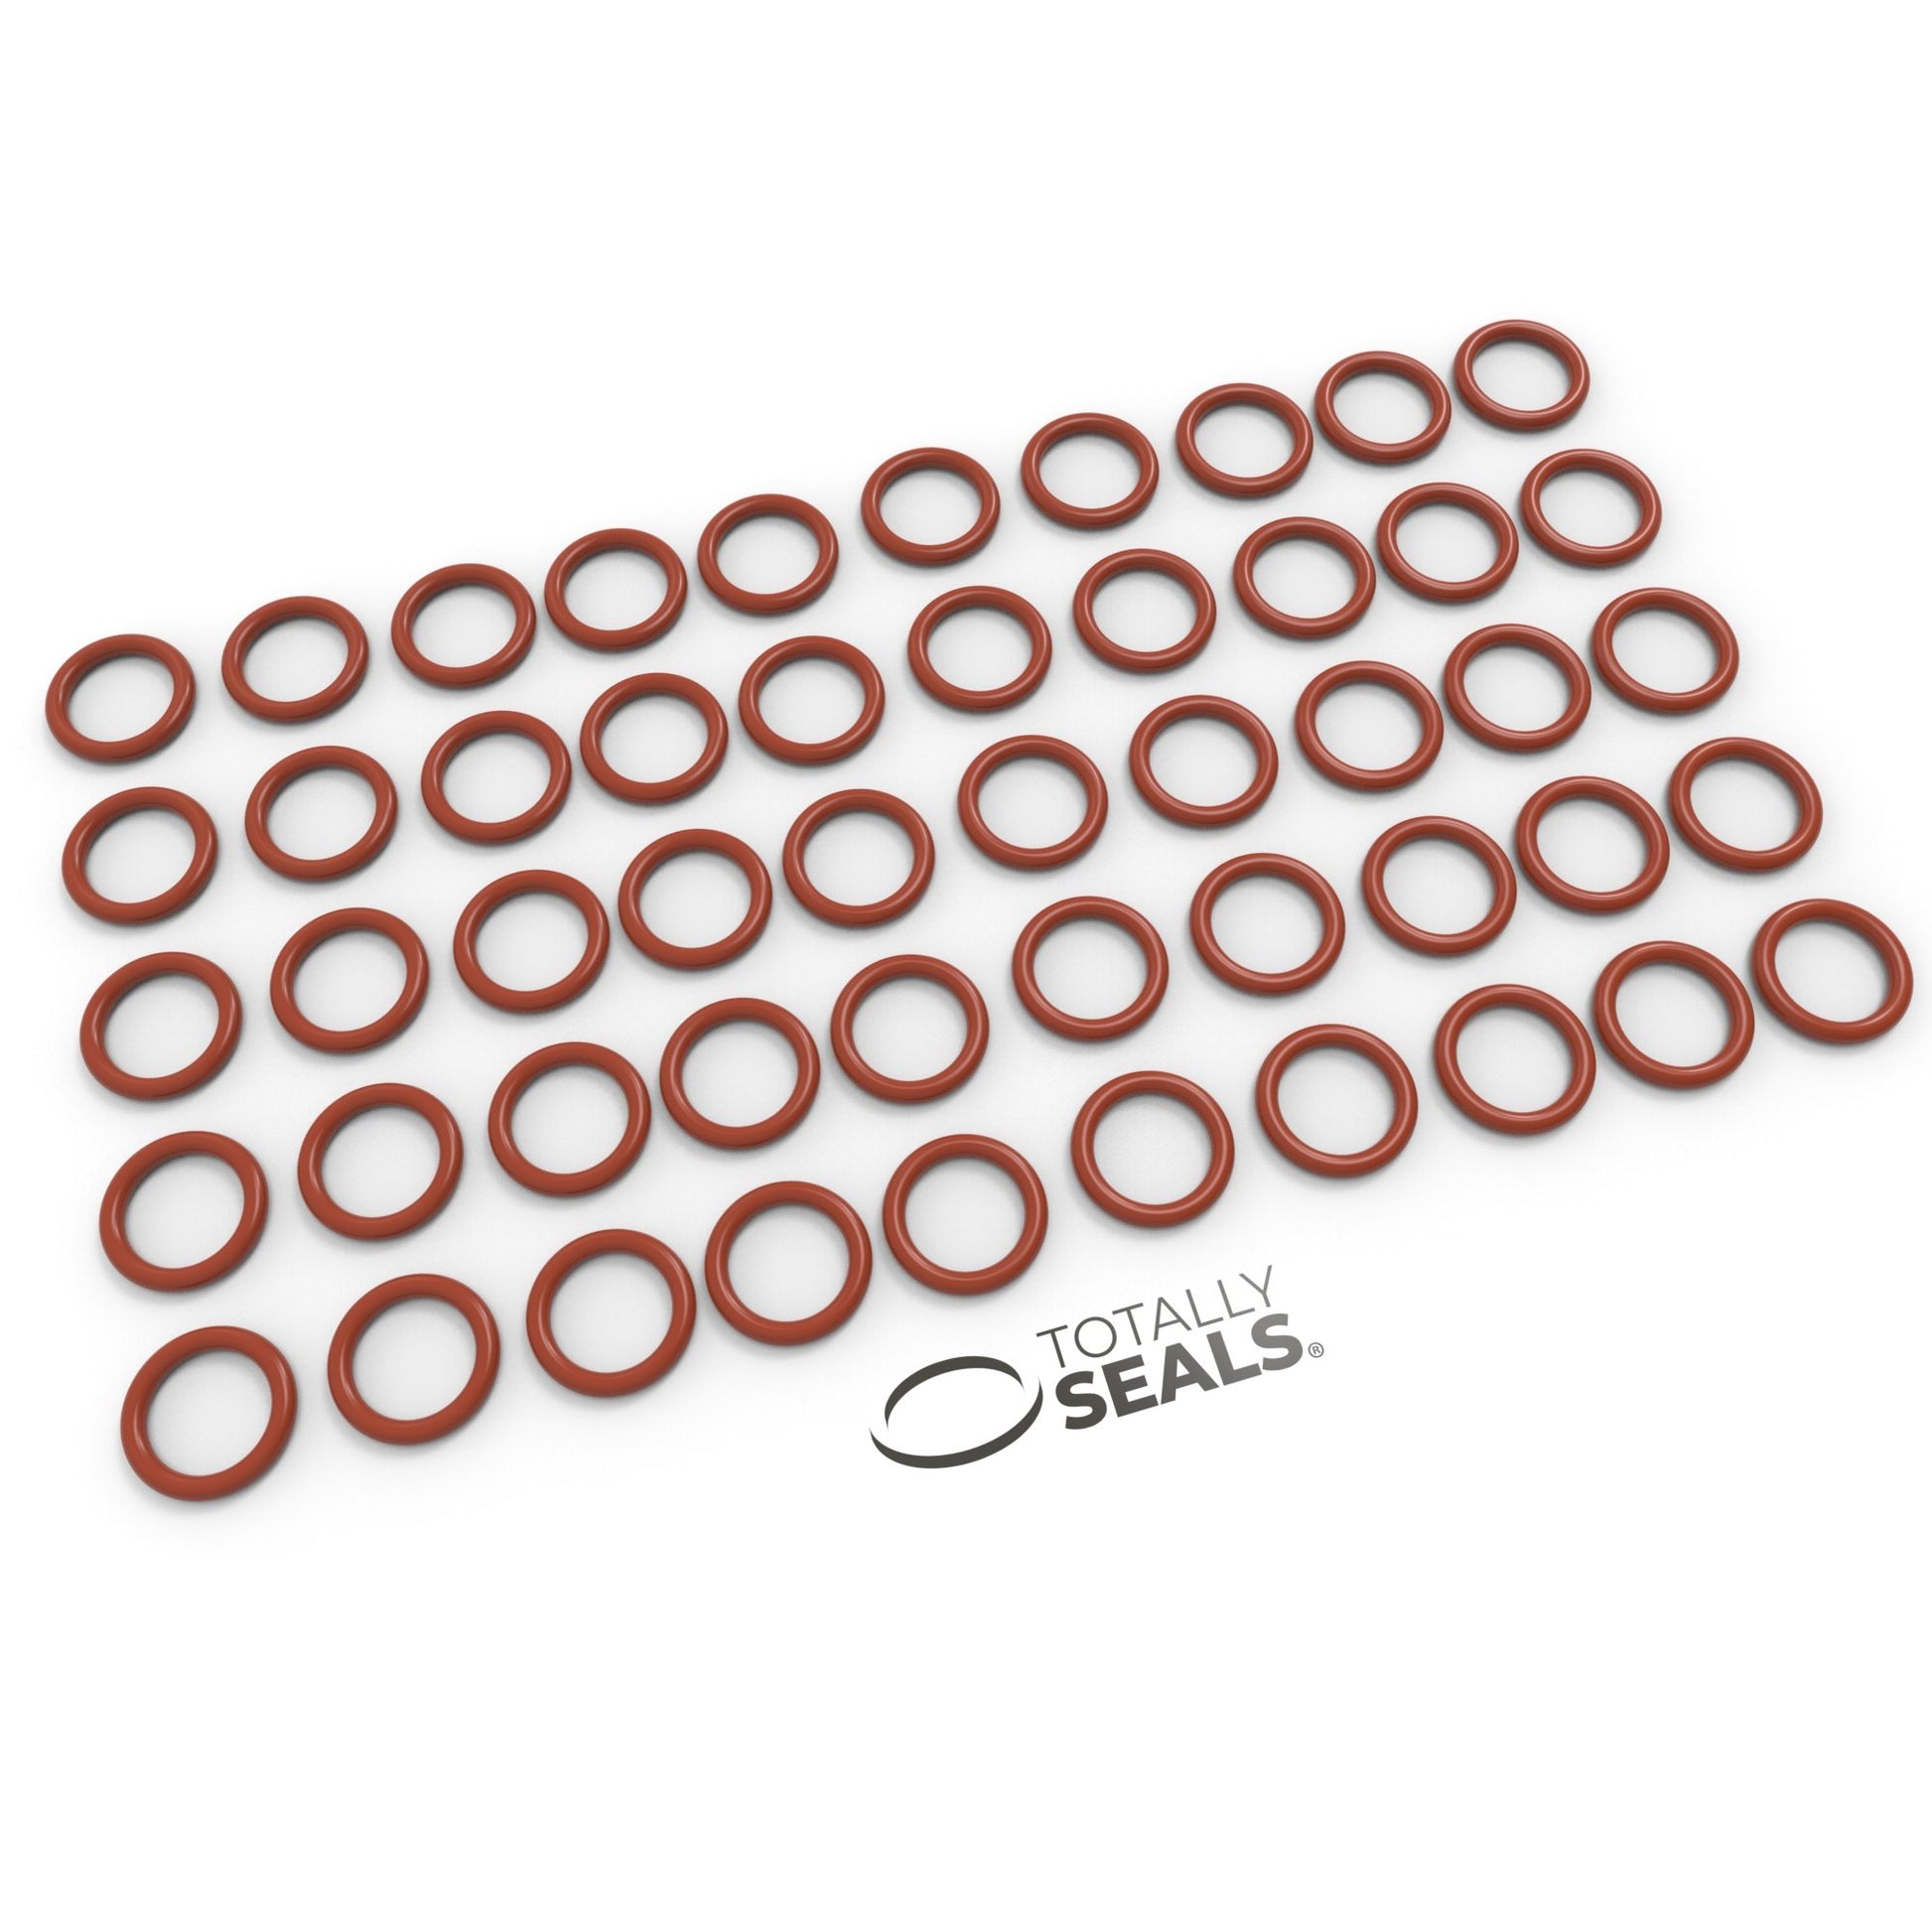 12mm x 2mm (16mm OD) Silicone O-Rings - Totally Seals®